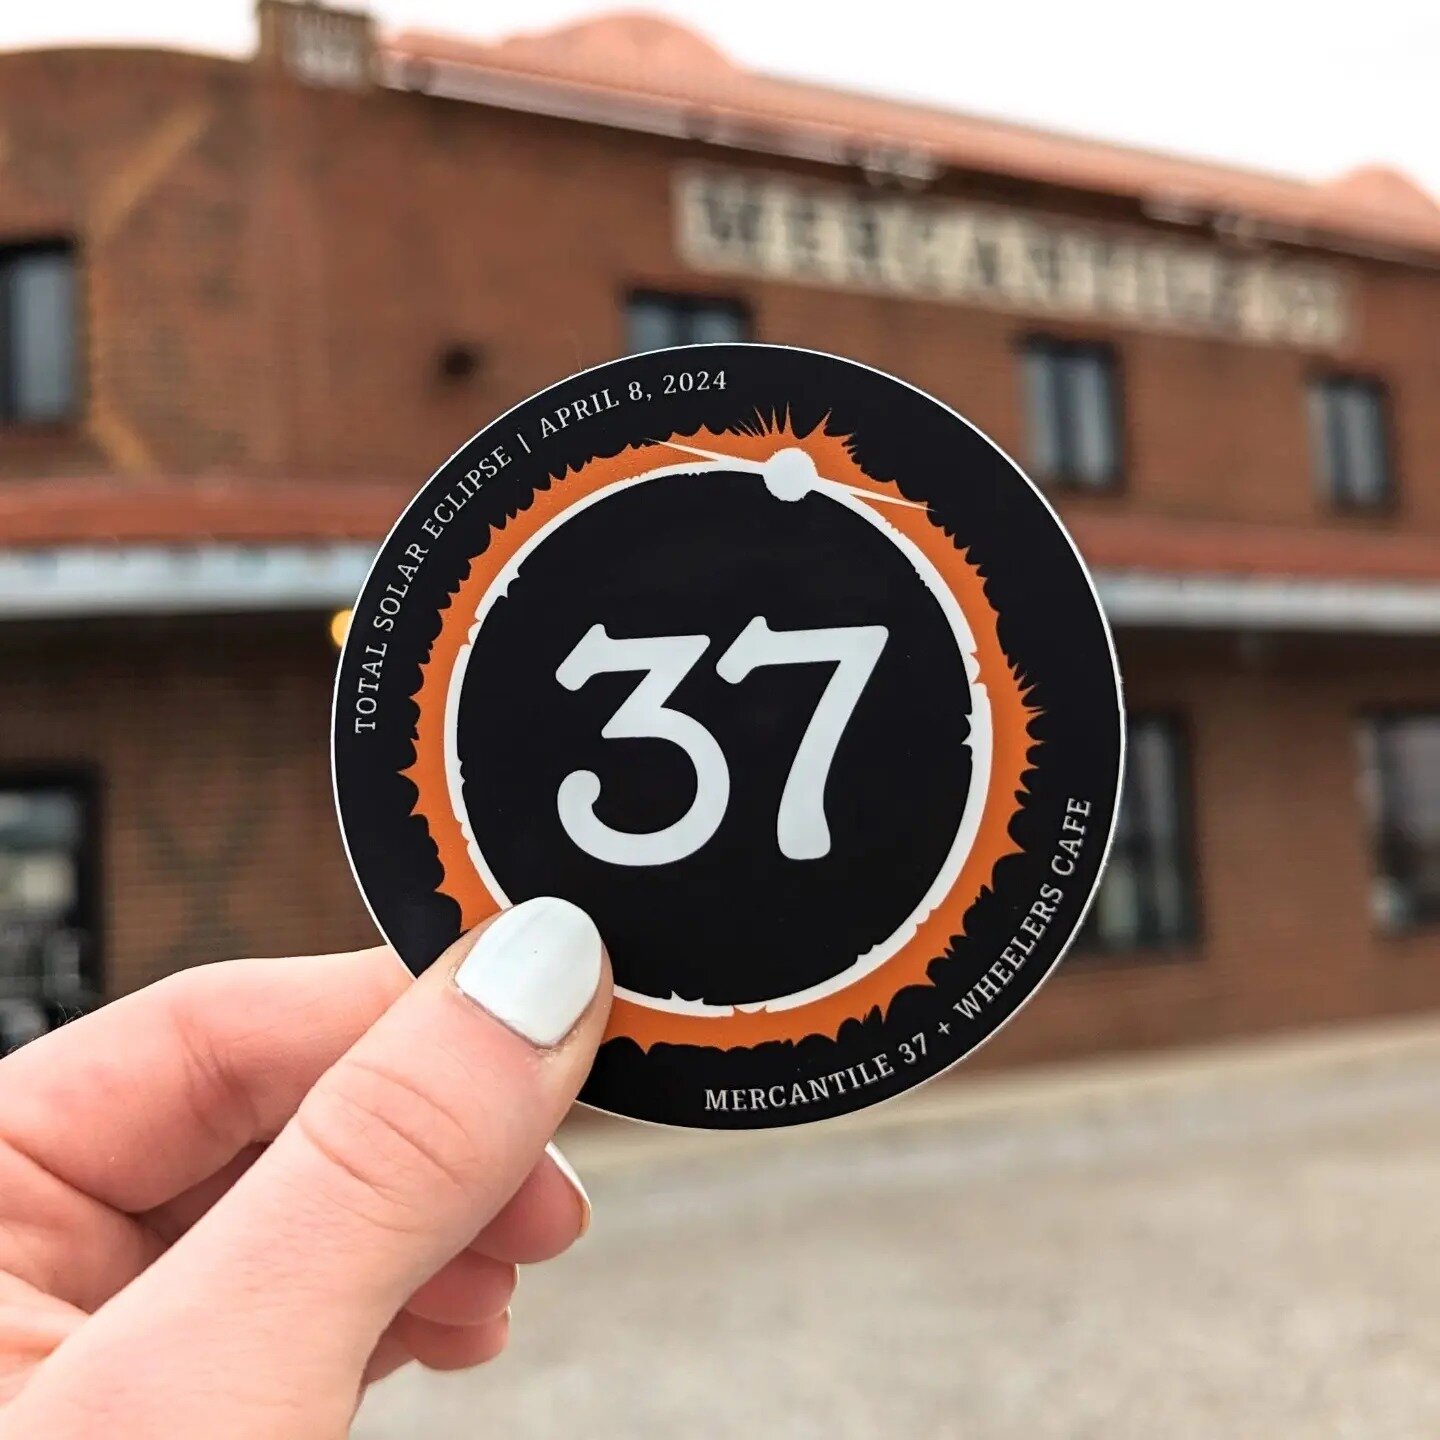 Have you seen the weather for Monday? It's showing 71 and sunny! We're ready for the eclipse! 

Come out and hang with us, open Monday 12-4.

#eclipse2024 #eclipse #indianaeclipse #wheelerscafe #mercantile37